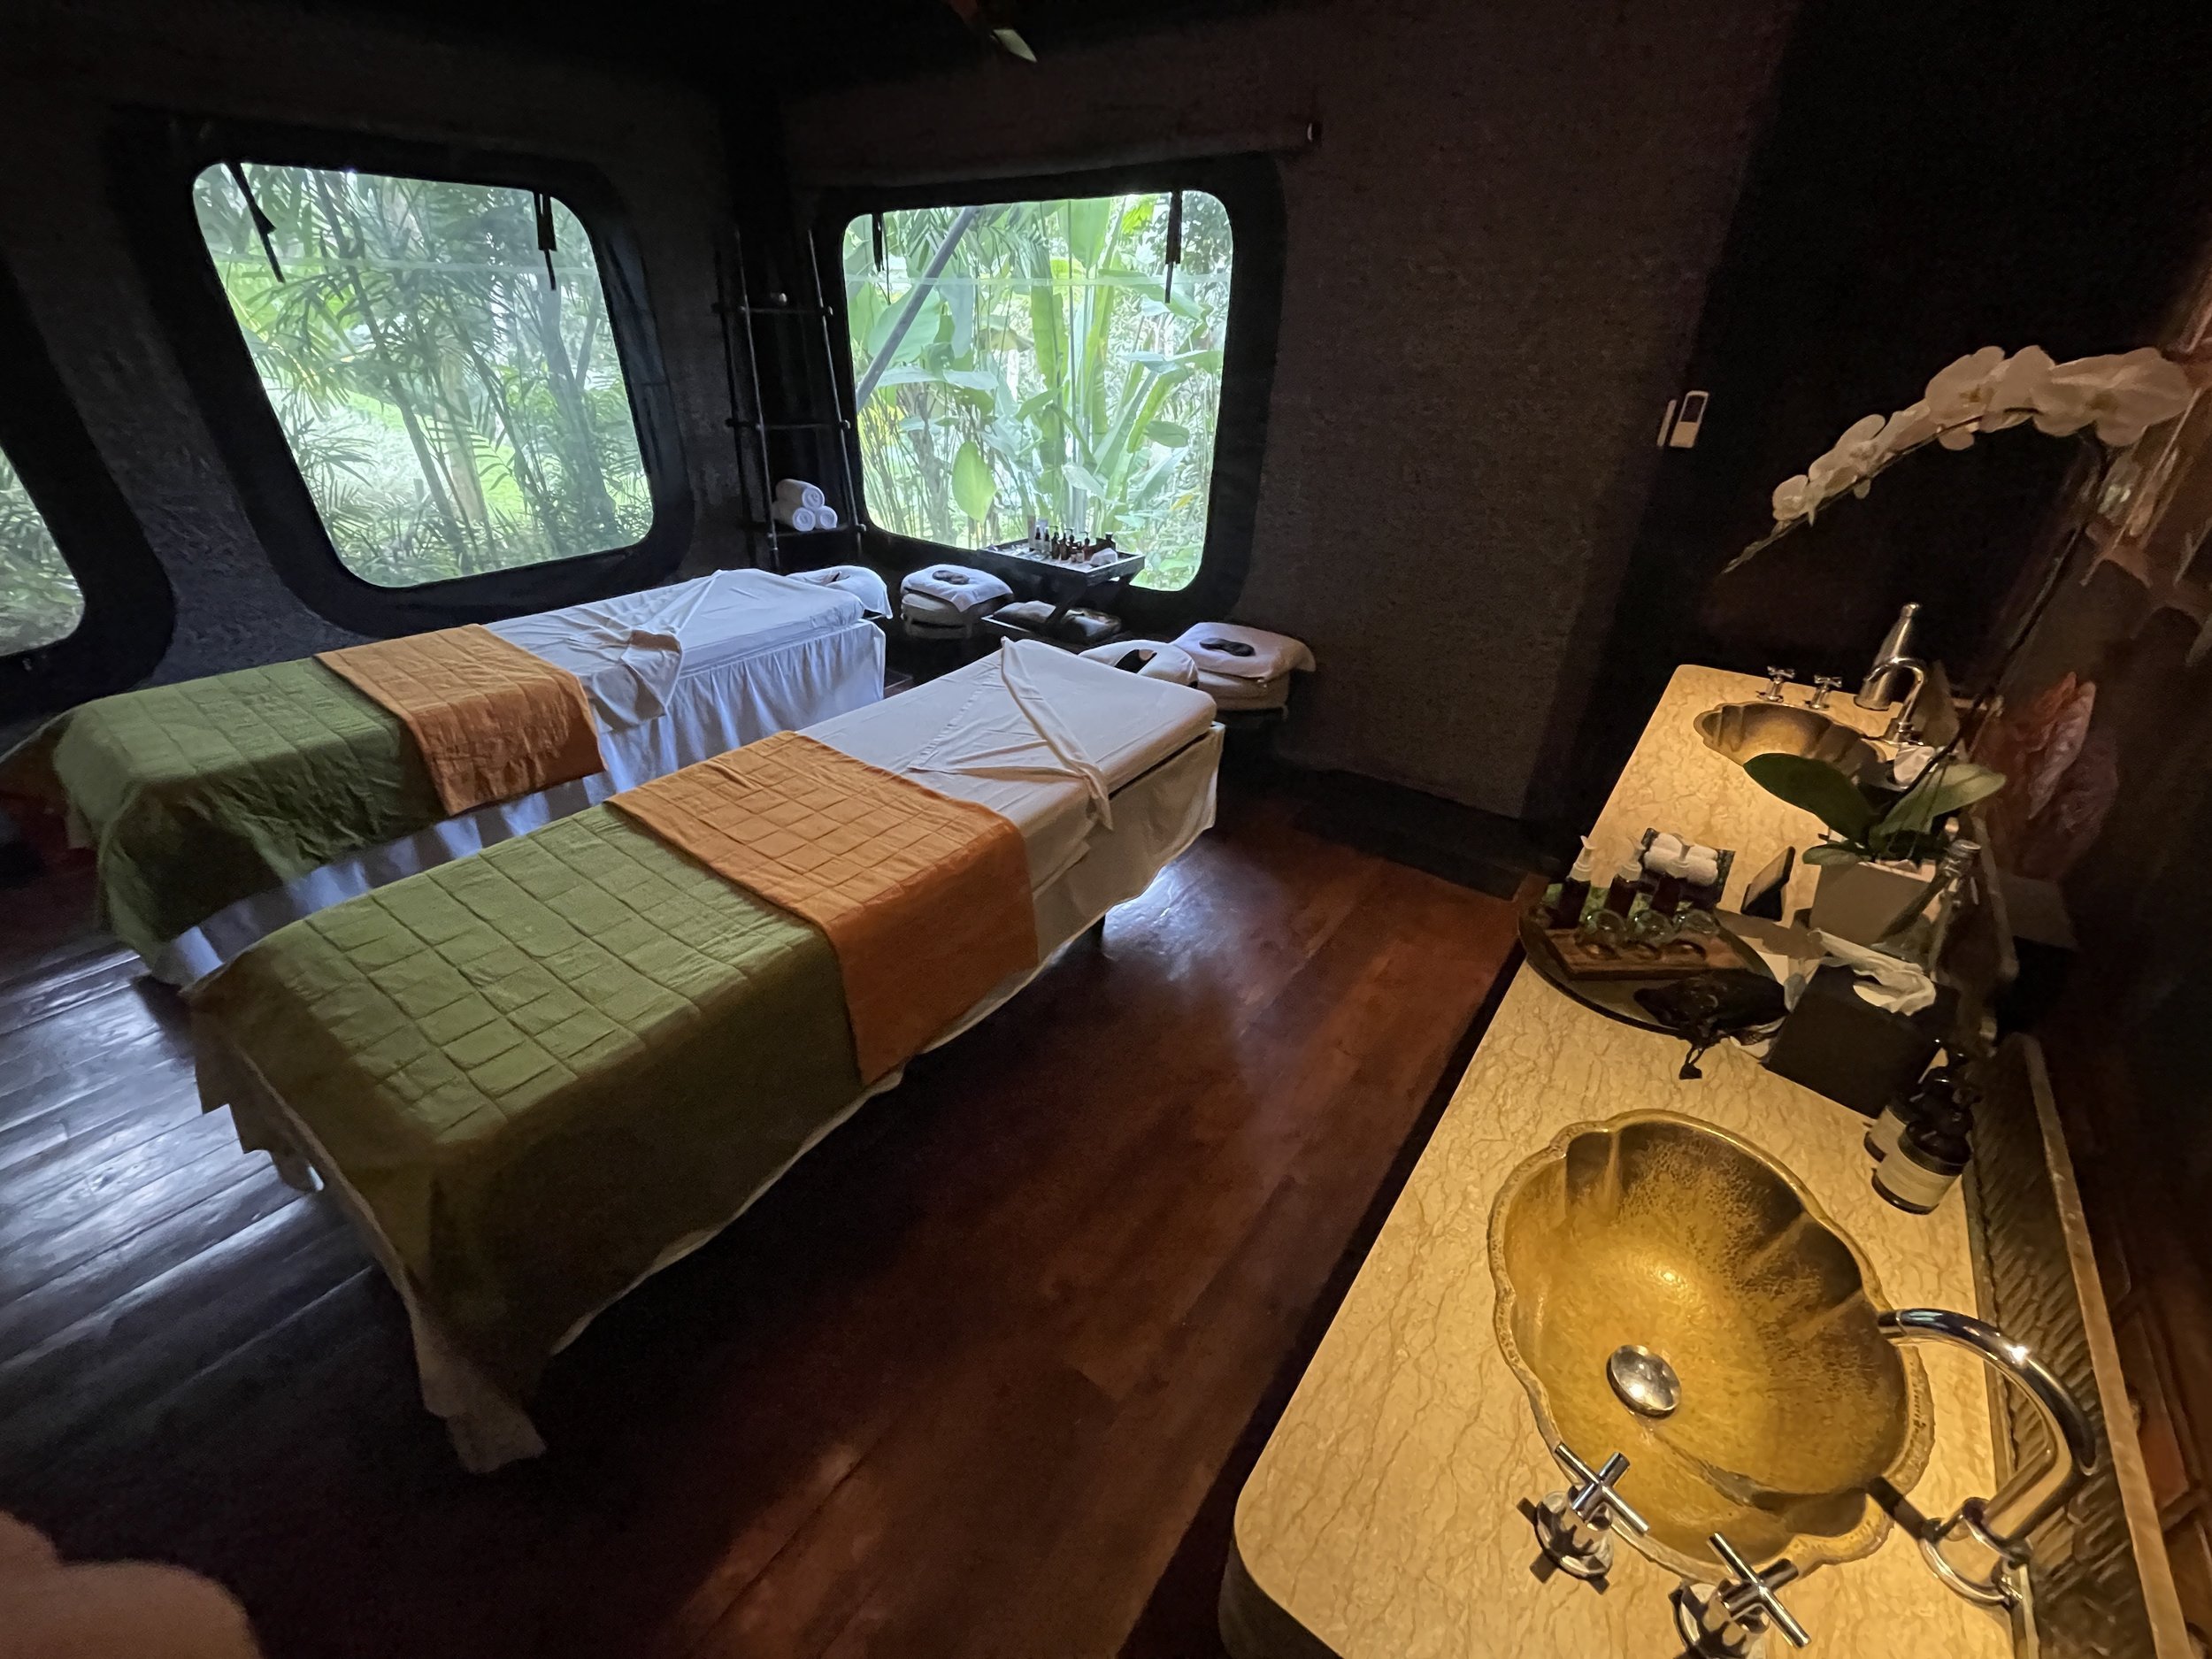 Capella Ubud Bali Luxury Hotel Review by The Private Traveller